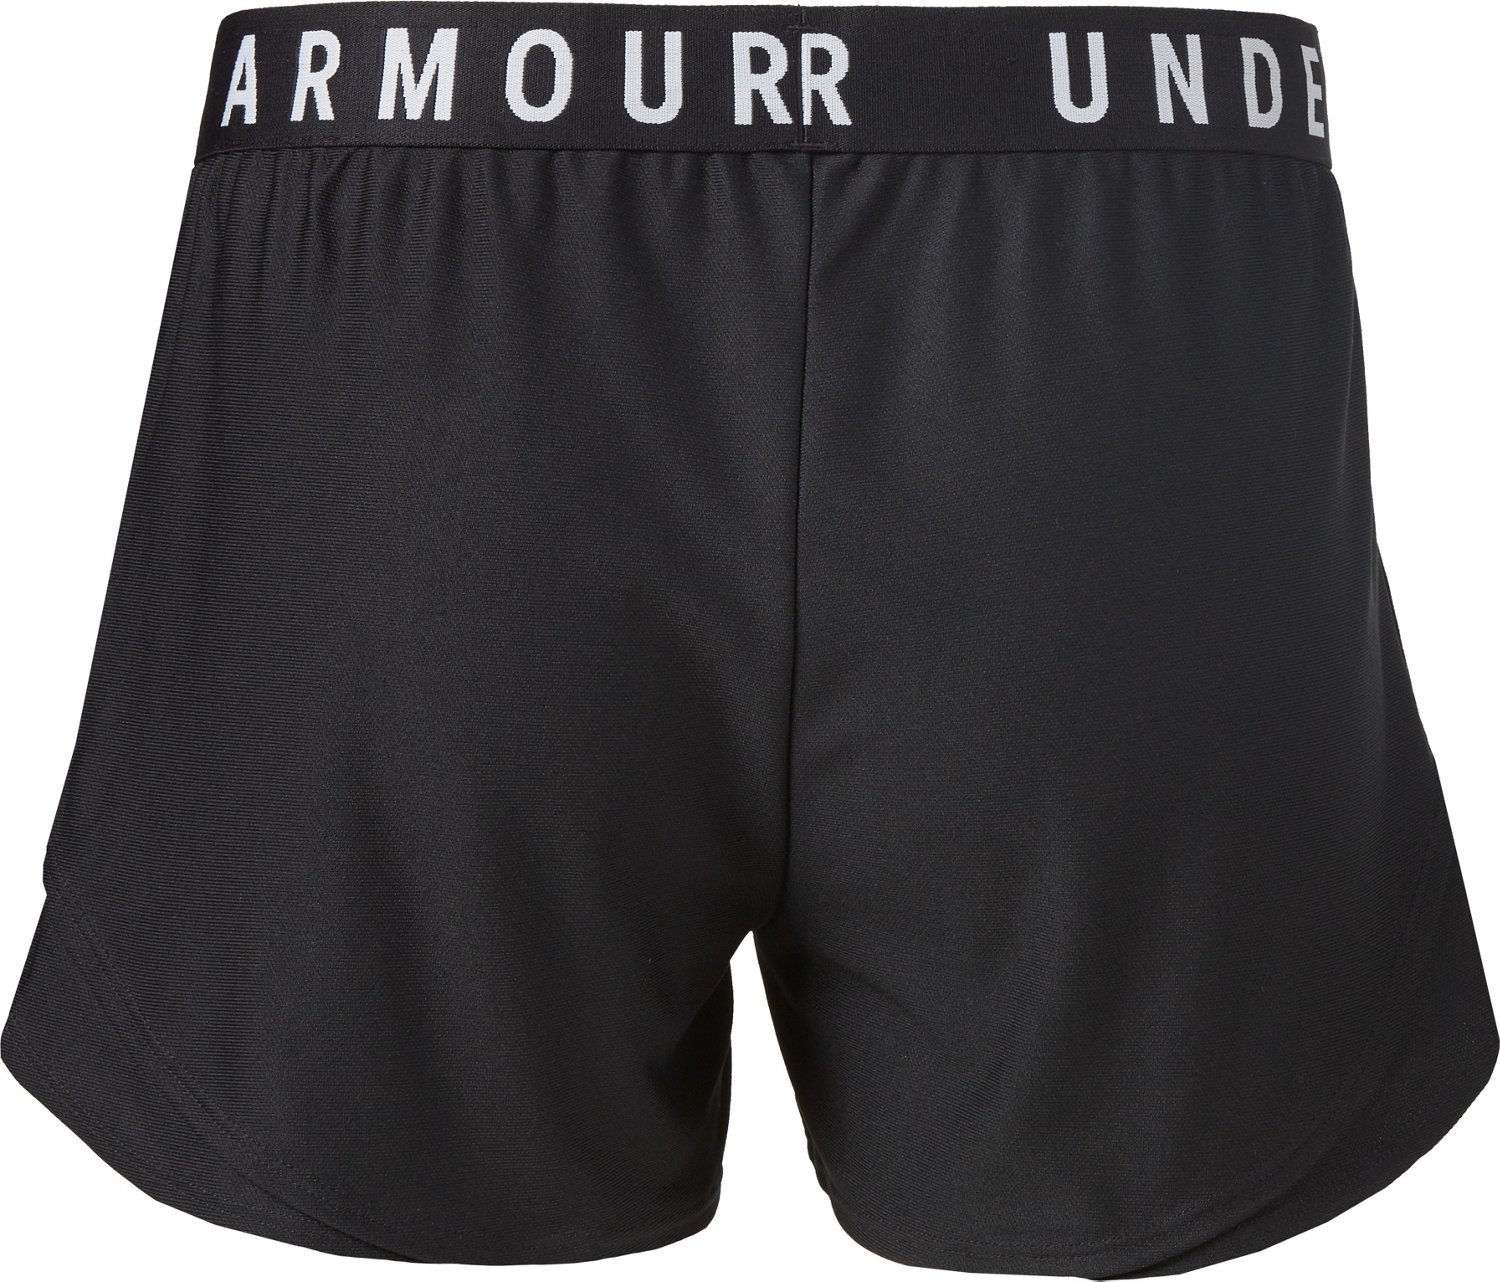 Under Armour Women’s Play Up Shorts 3.0